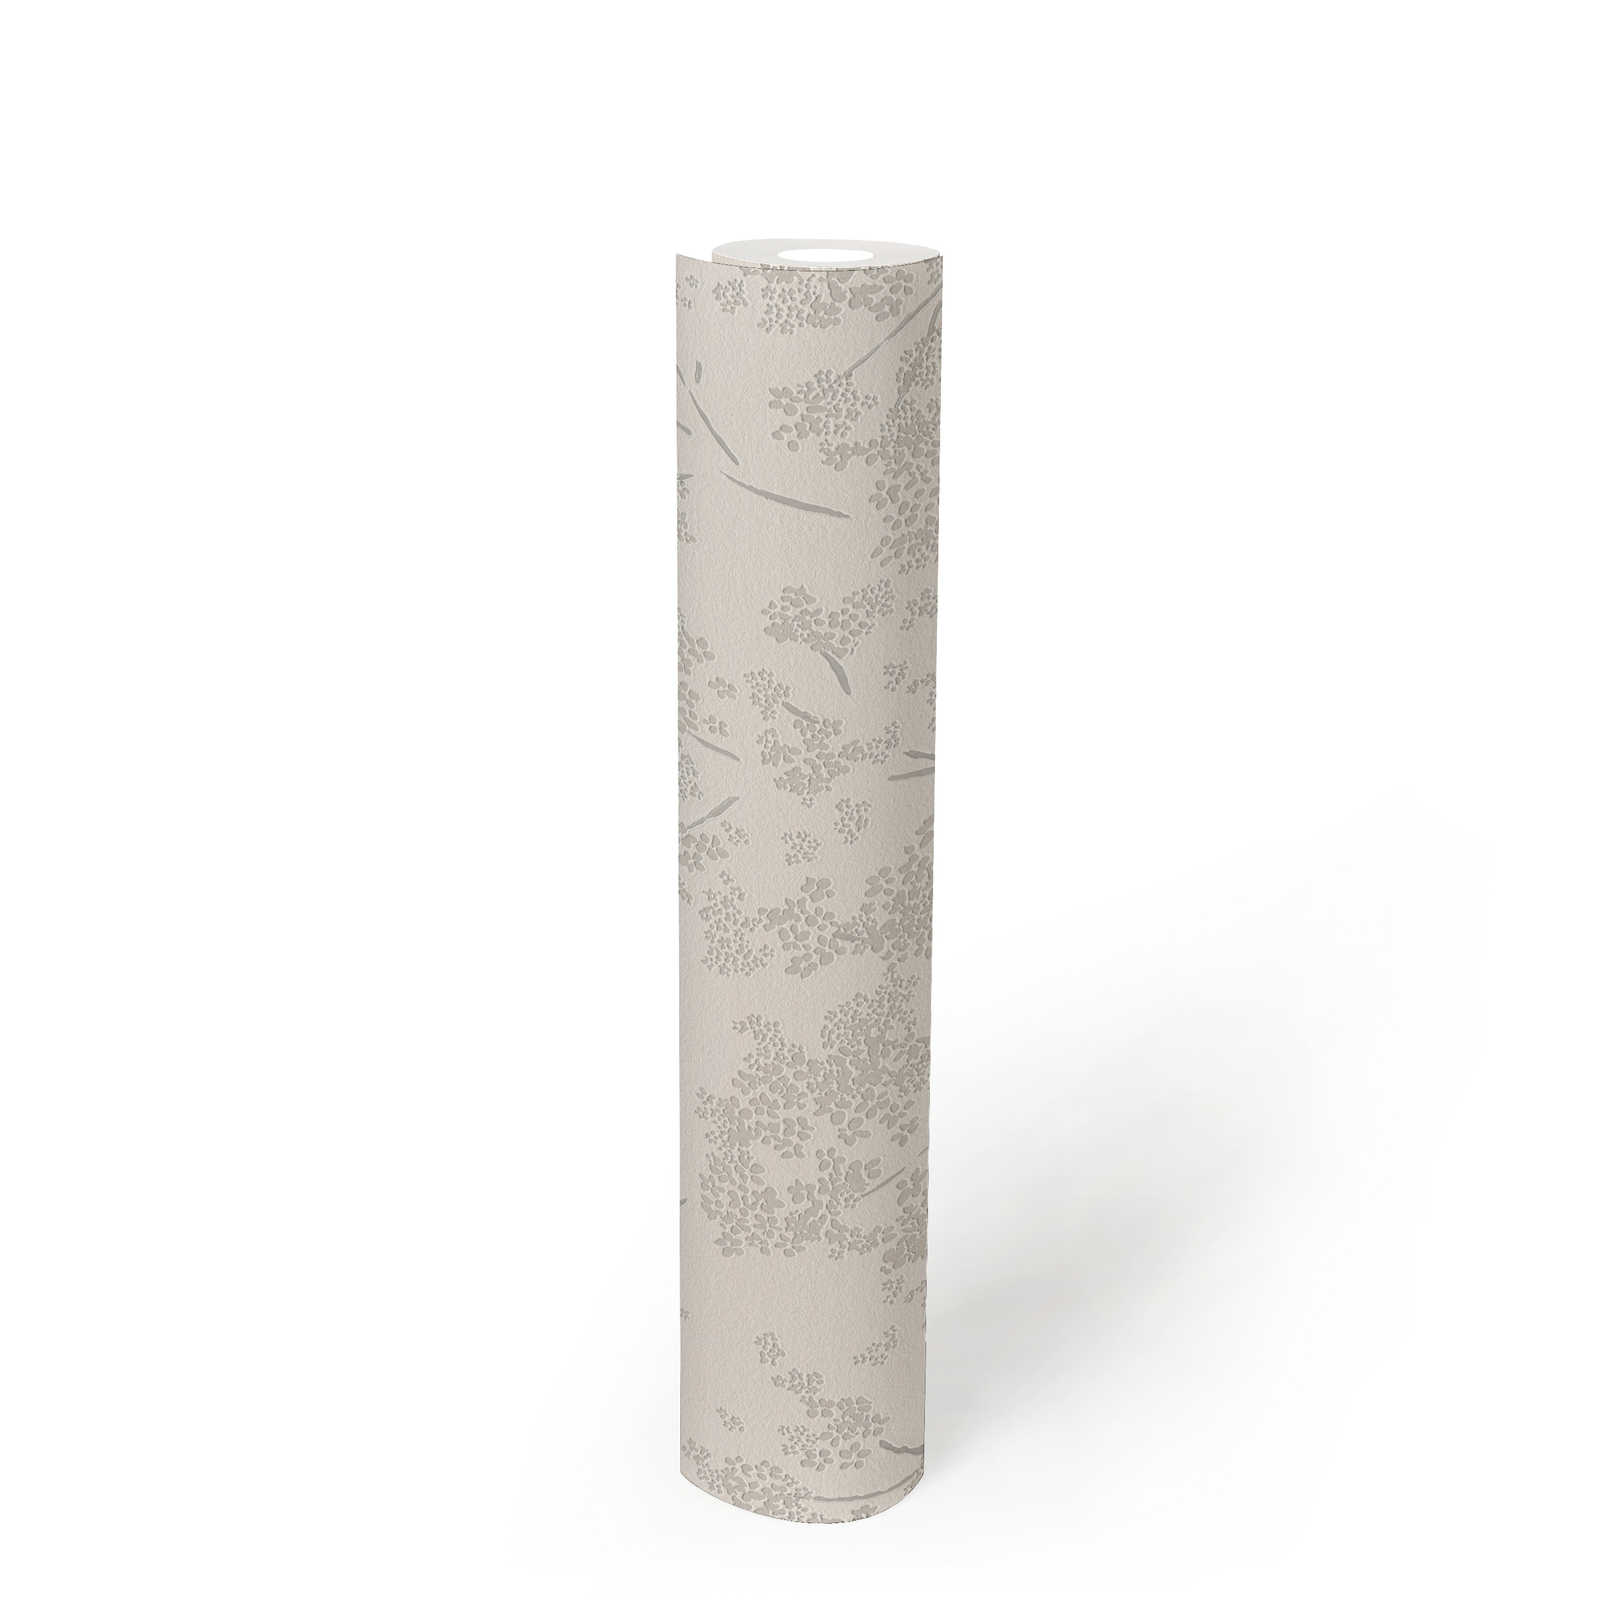             Non-woven wallpaper with floral pattern - white, grey
        